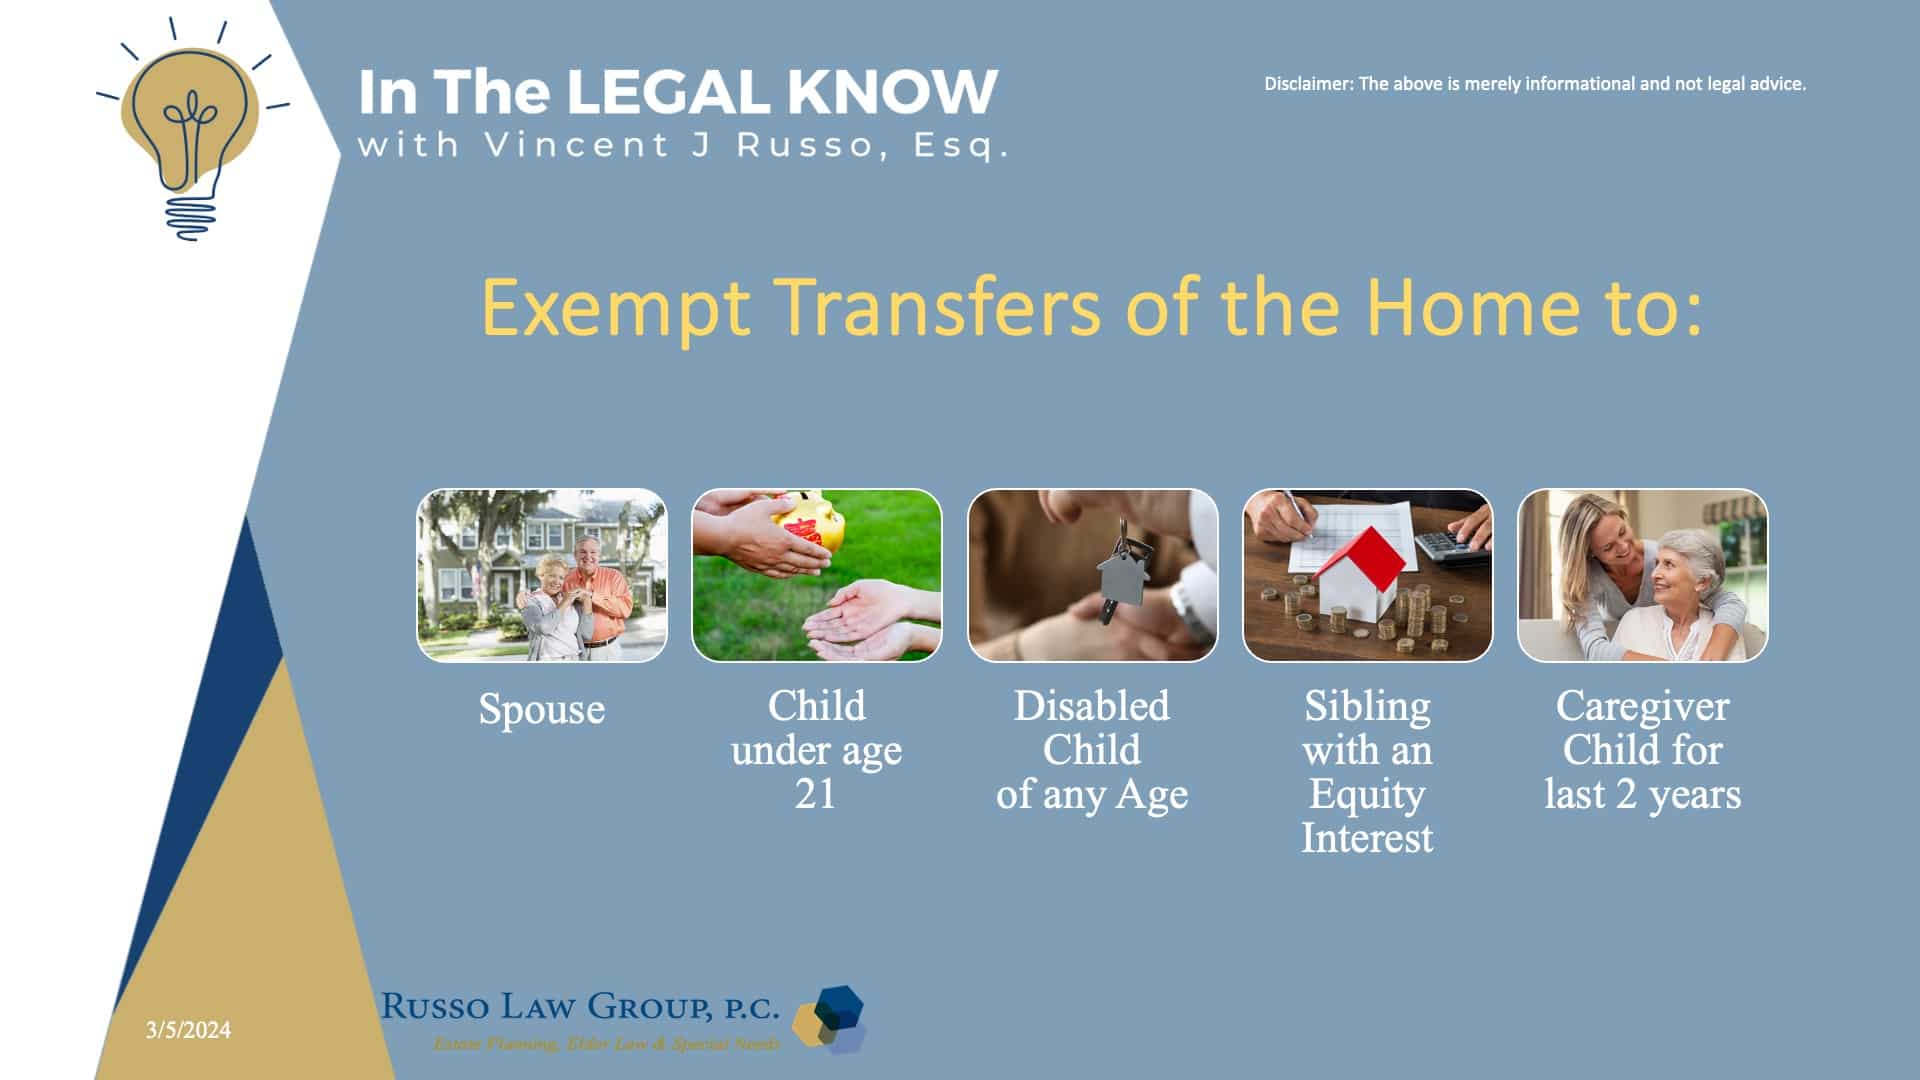 Exempt Transfers of the Home